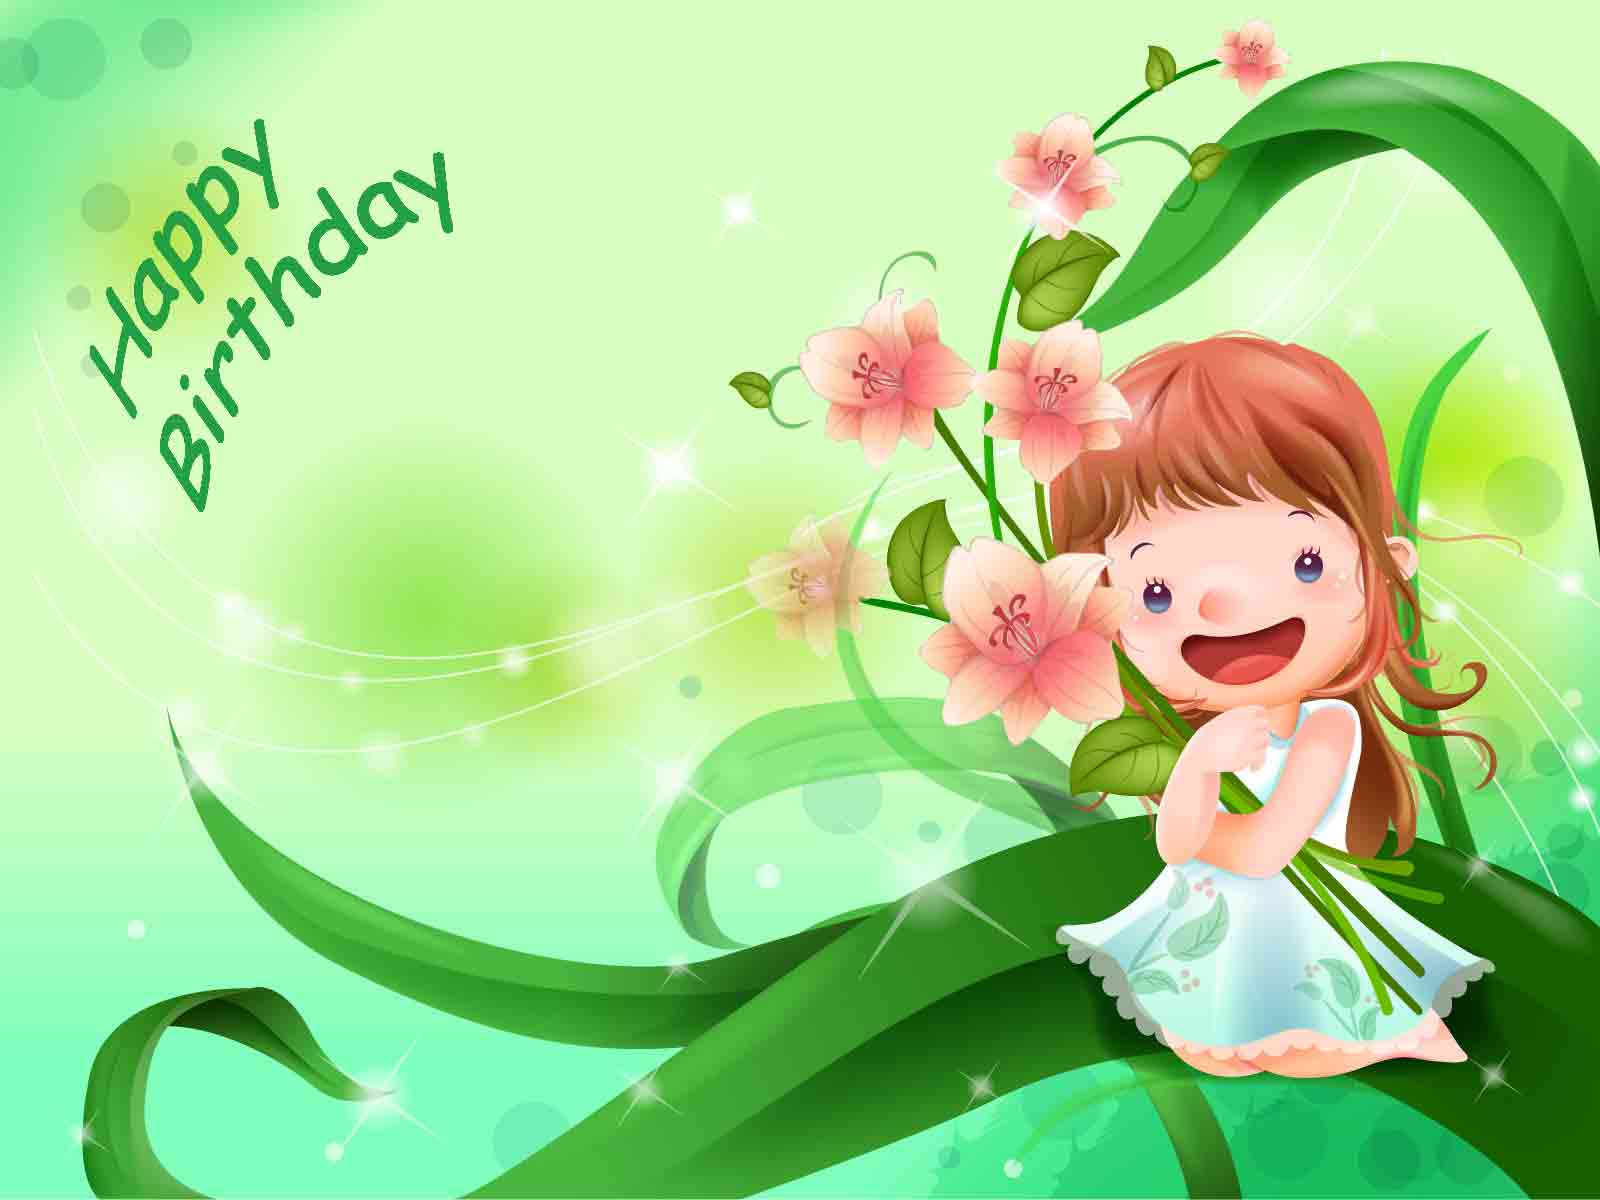 Warm And Sincere Birthday Wishes To Show Your Love - Baby Birthday Wishes Images Download - HD Wallpaper 